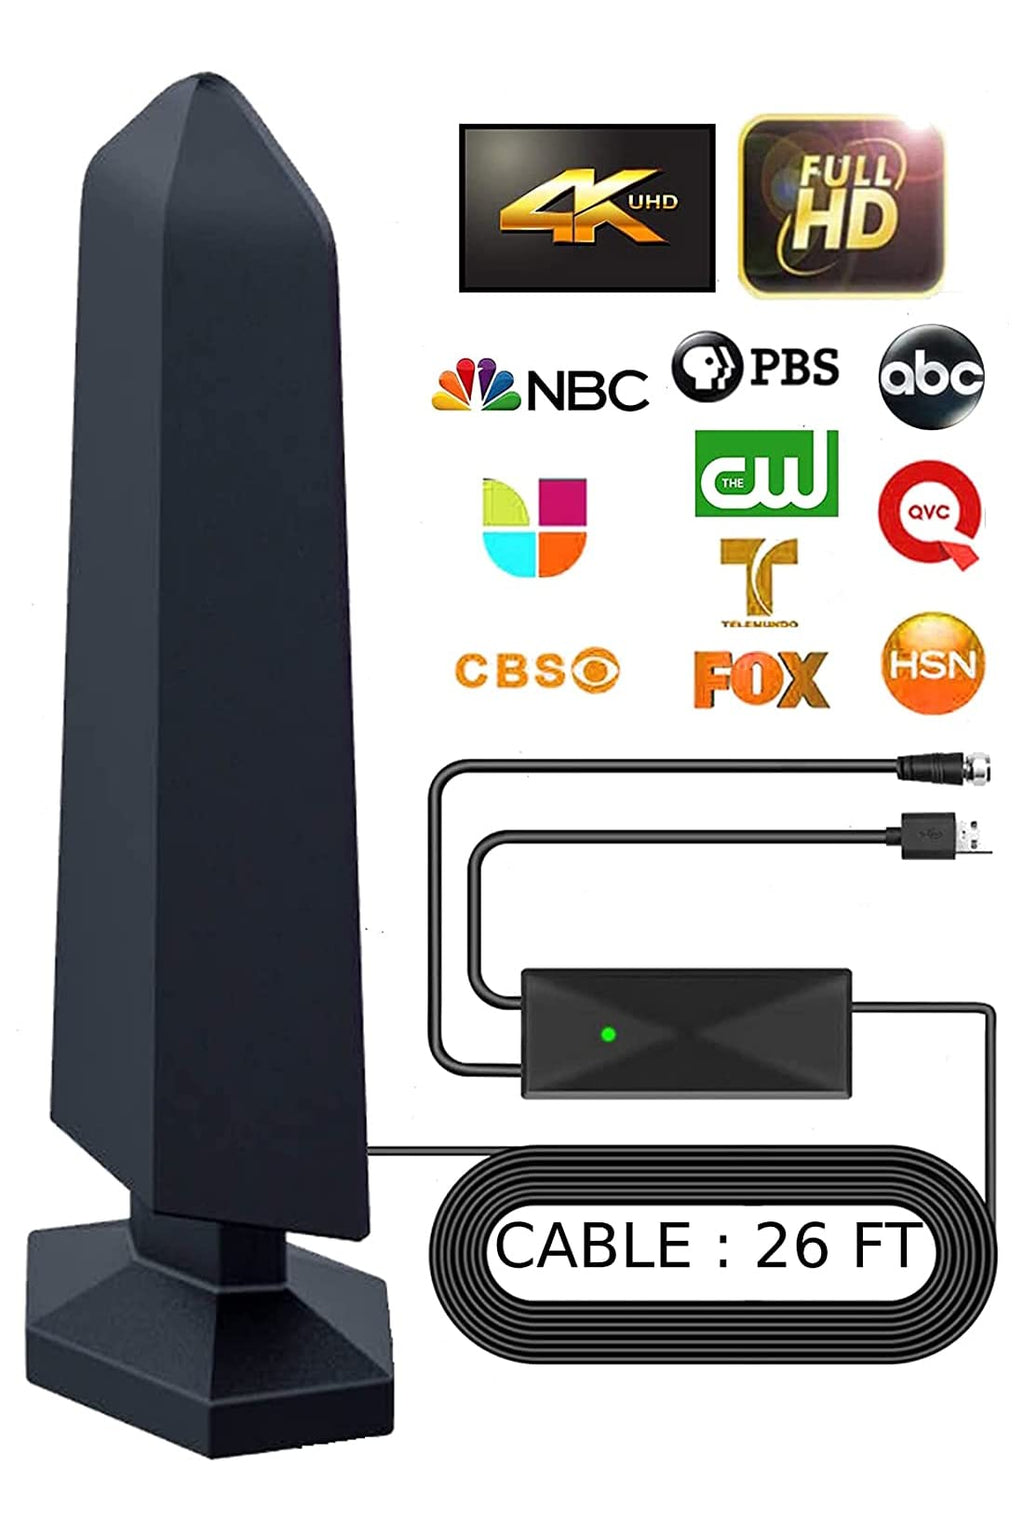  [AUSTRALIA] - ANTIER Amplified Digital TV Antenna 450 Miles Range HDTV - Support 4K 8K 1080p Fire tv Stick and All Older TV's - Smart Switch Amplifier Indoor Signal Booster - 9ft Coax Cable Special Extended